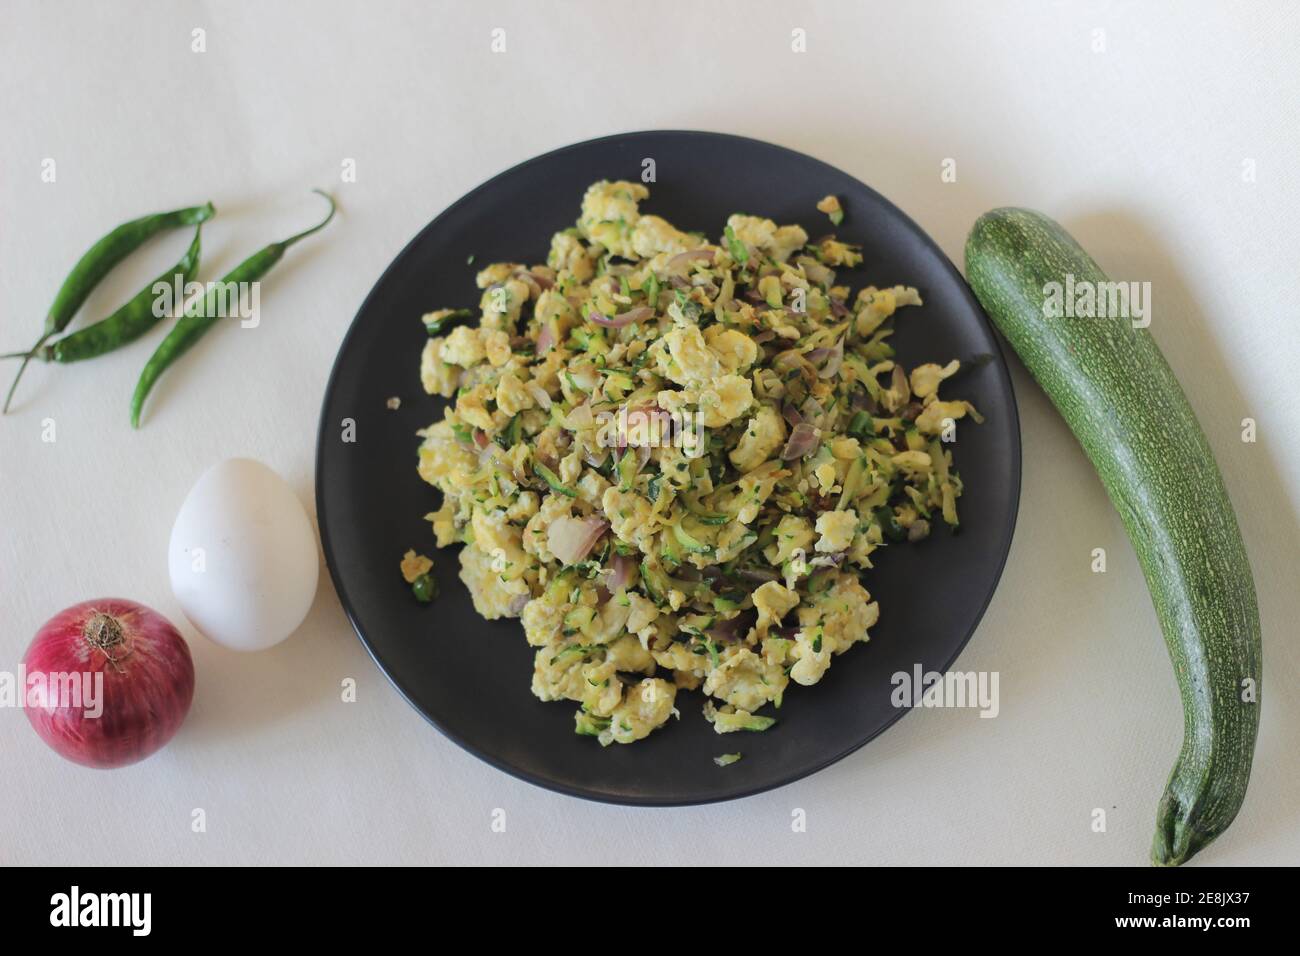 Scrambled Eggs With grated green Zucchini as a healthy breakfast Stock Photo